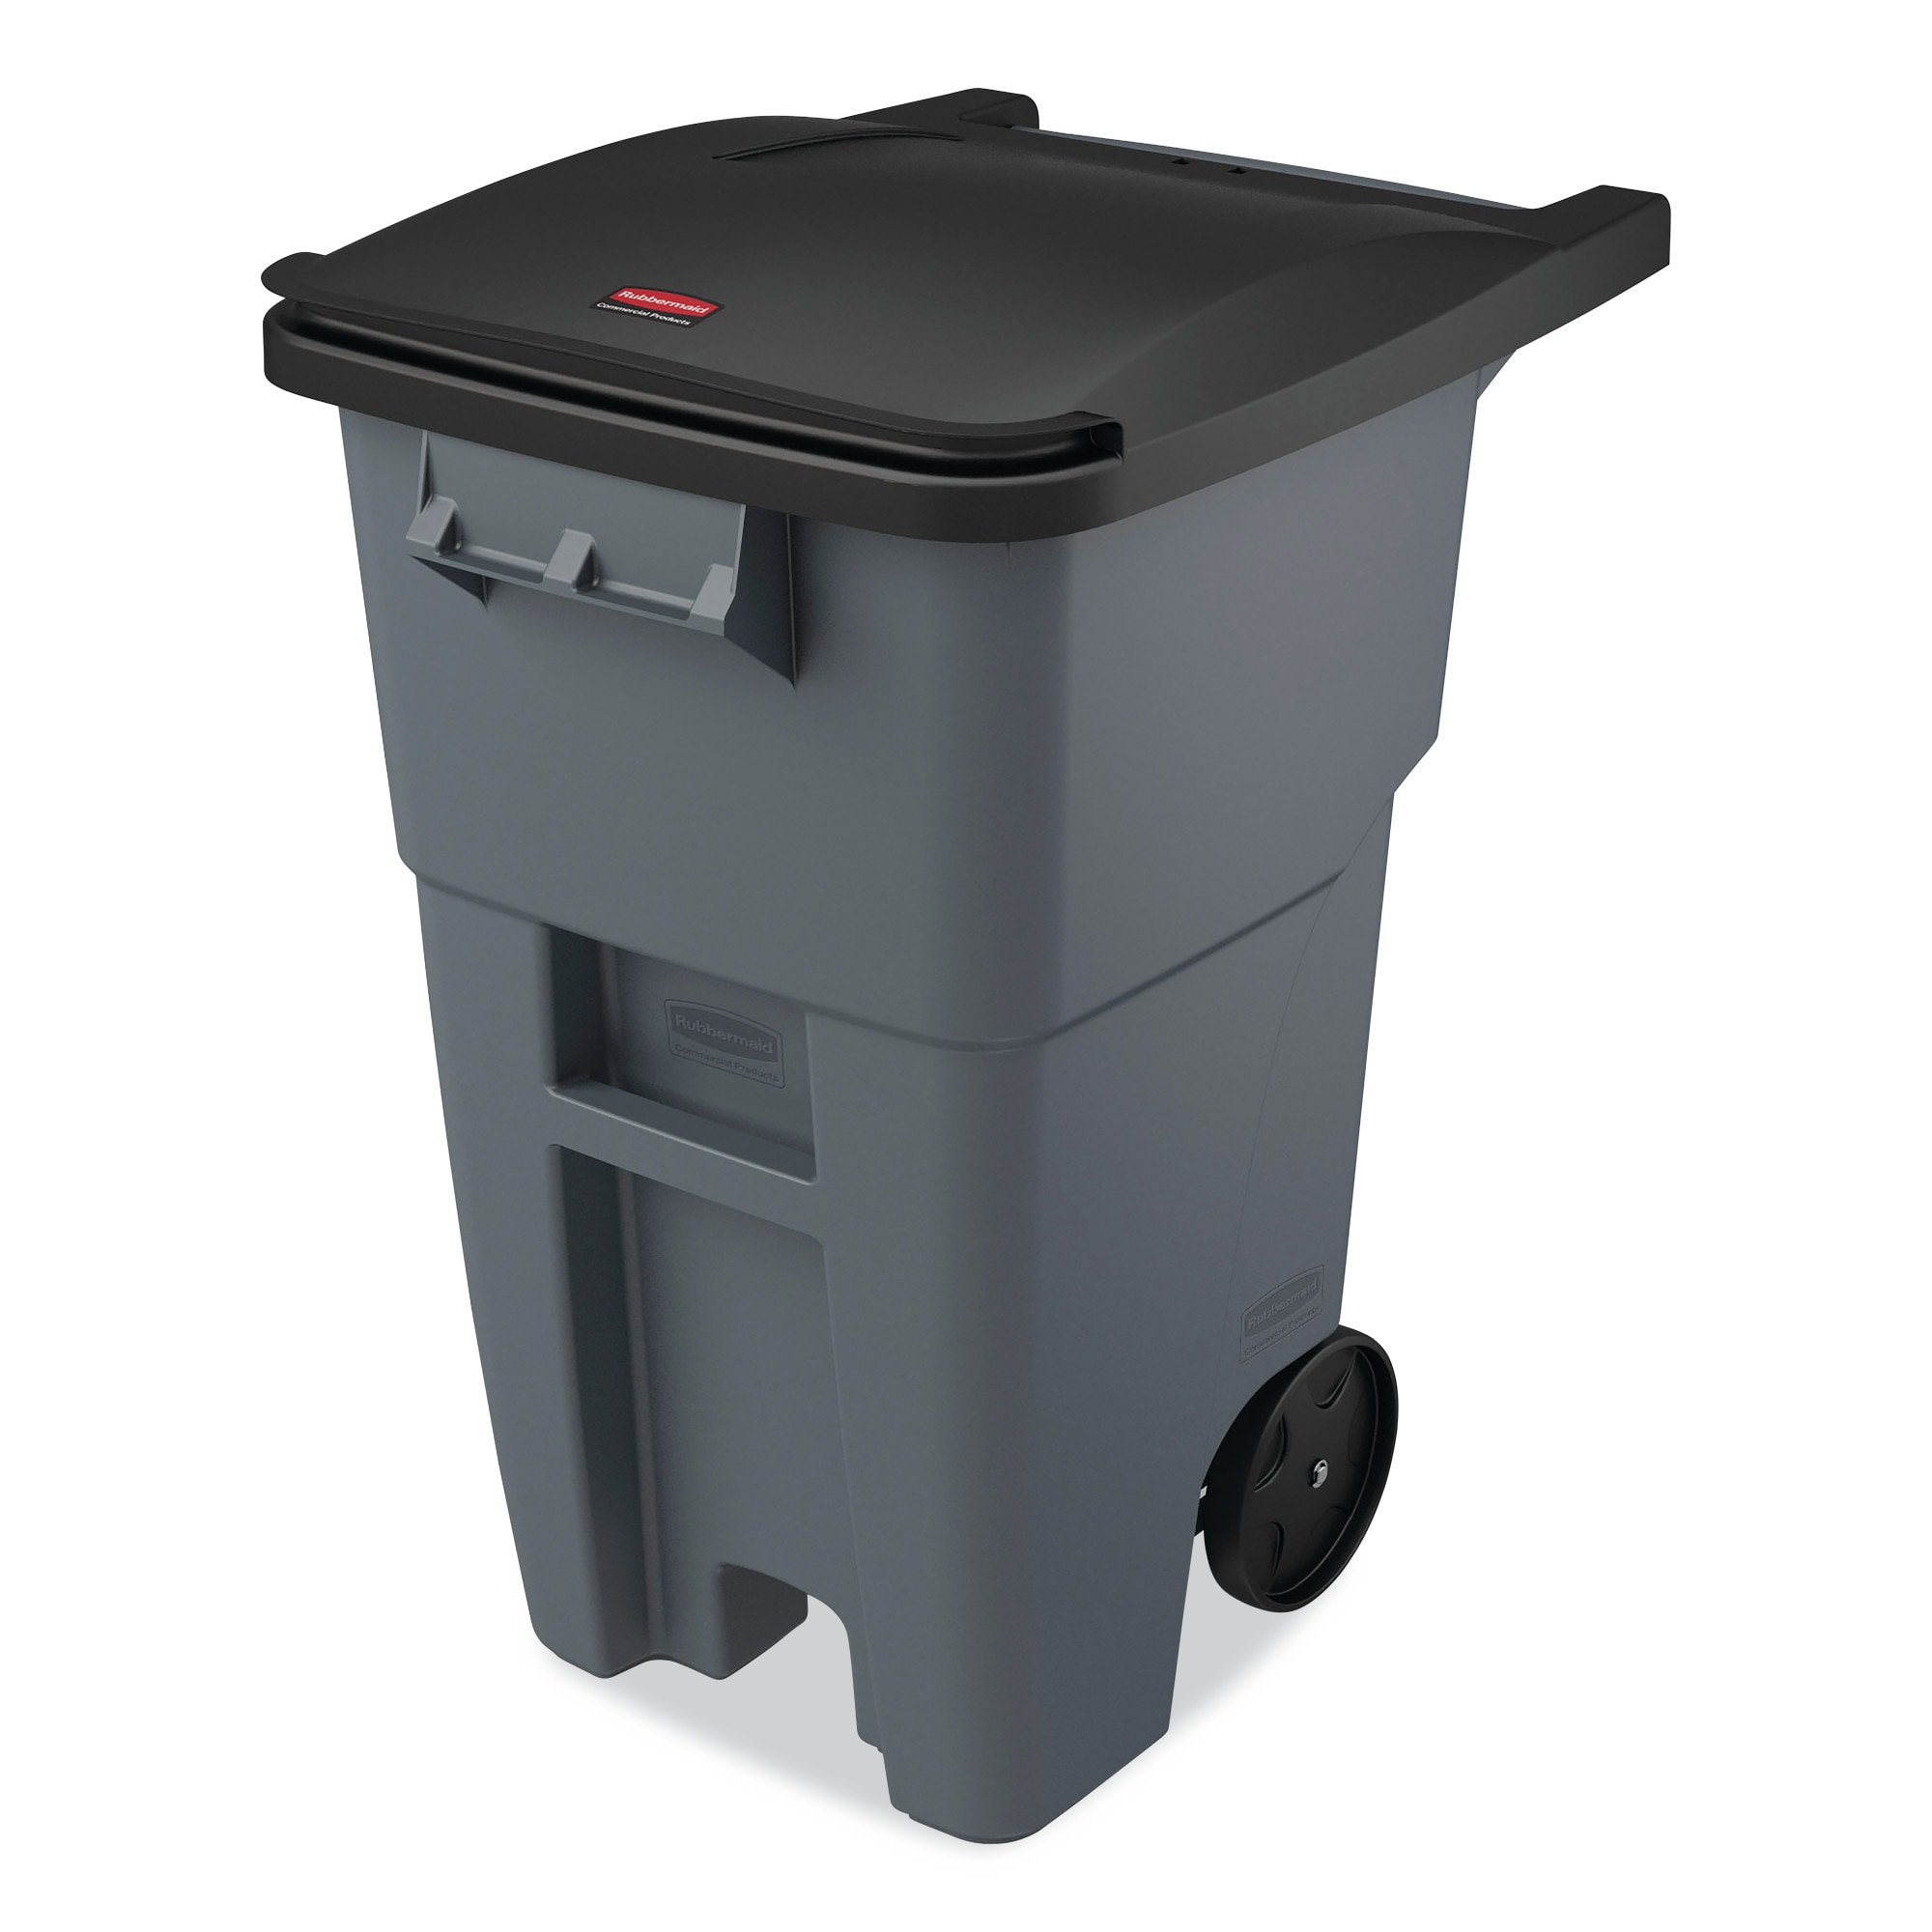 Rubbermaid Brute Plastic Trash Can Container, 32 Gallons, Grey